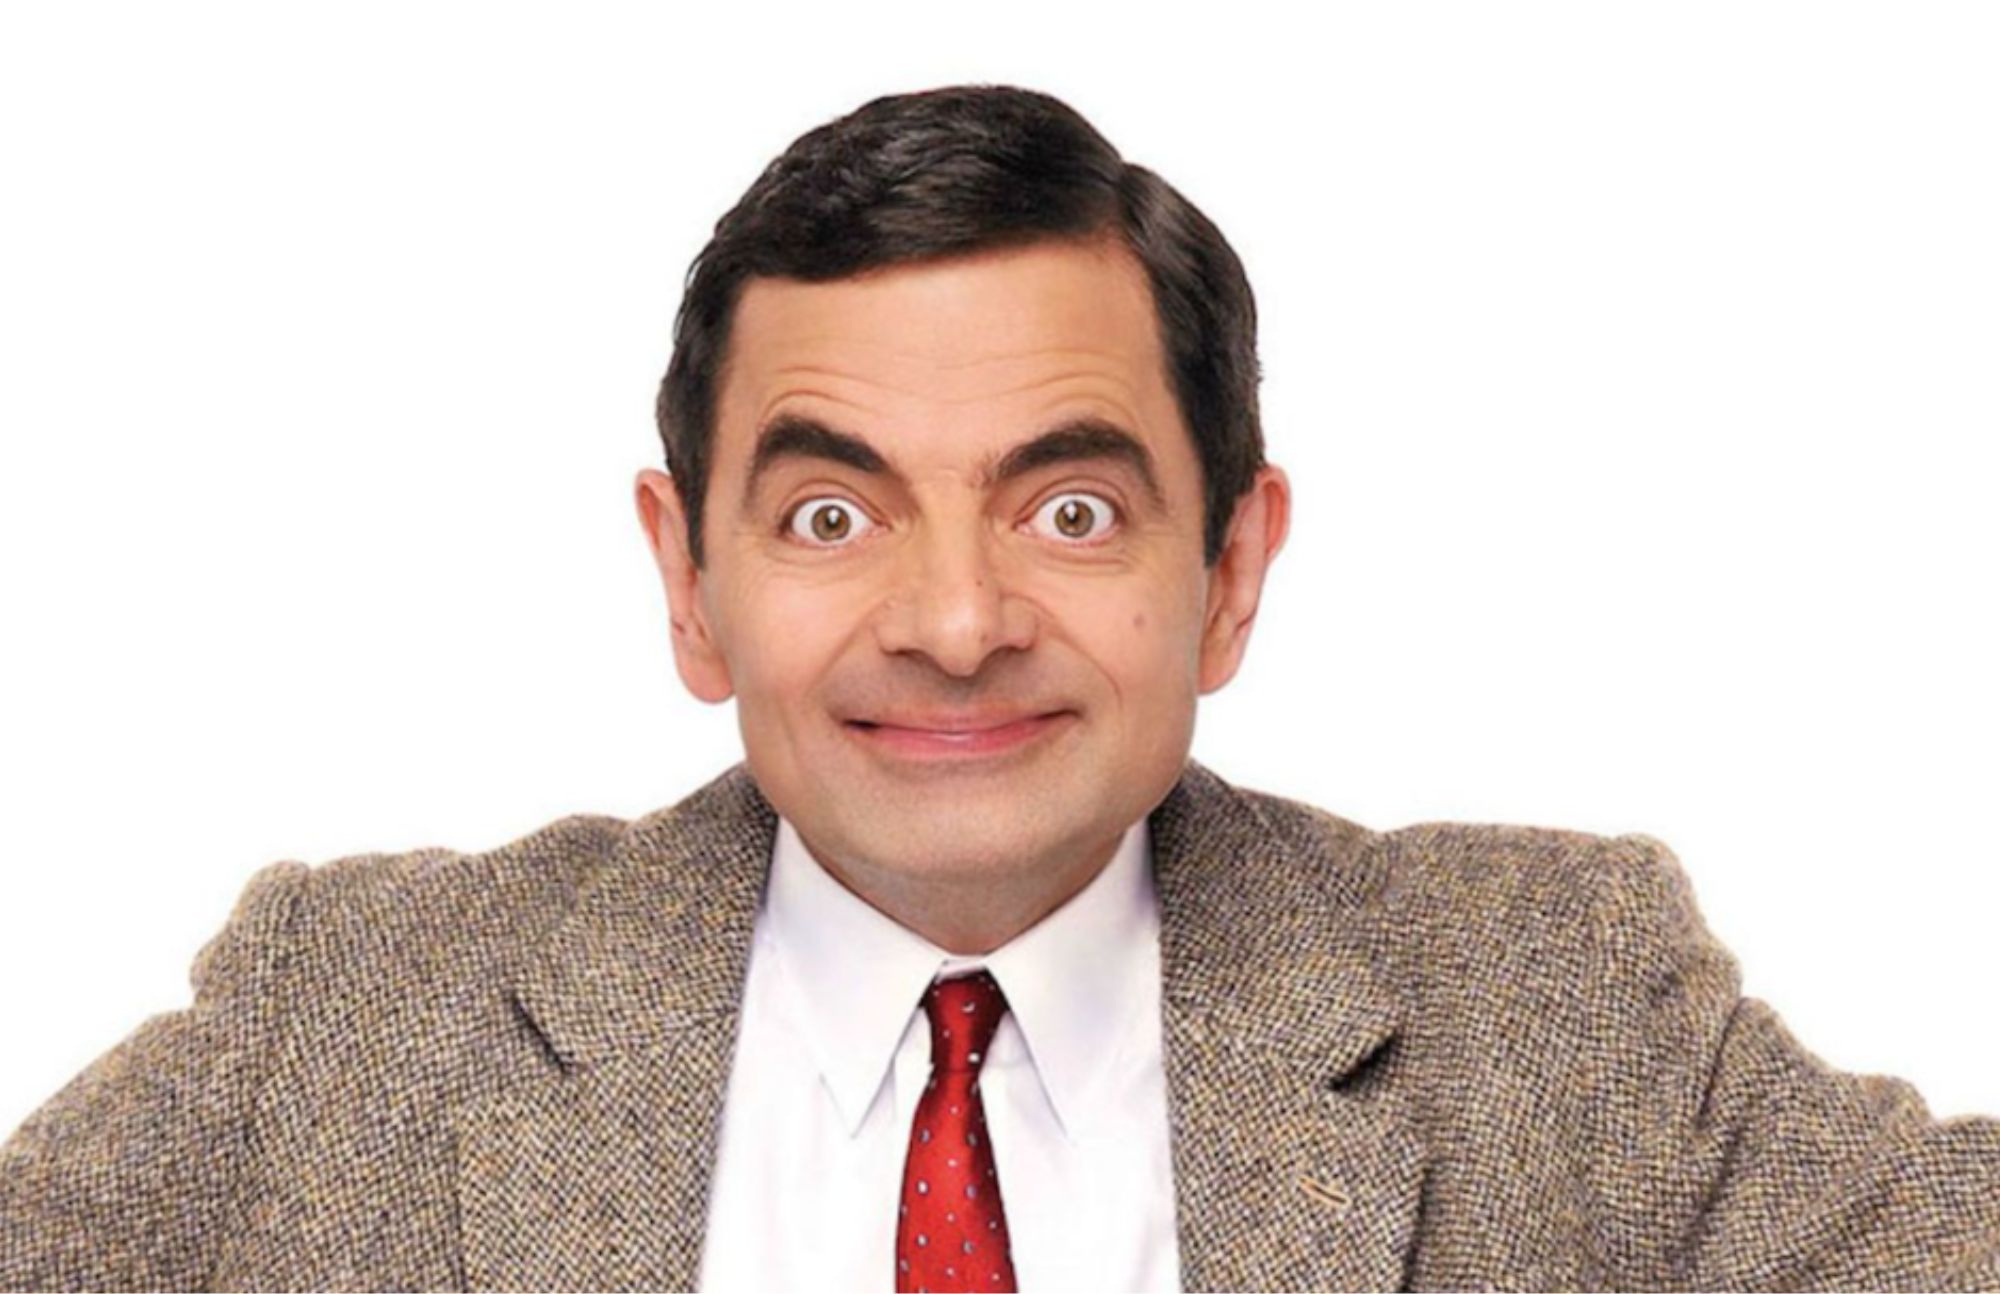 Rowan Atkinson, also known as Mr. Bean, displays his large eyes and remarkable smile